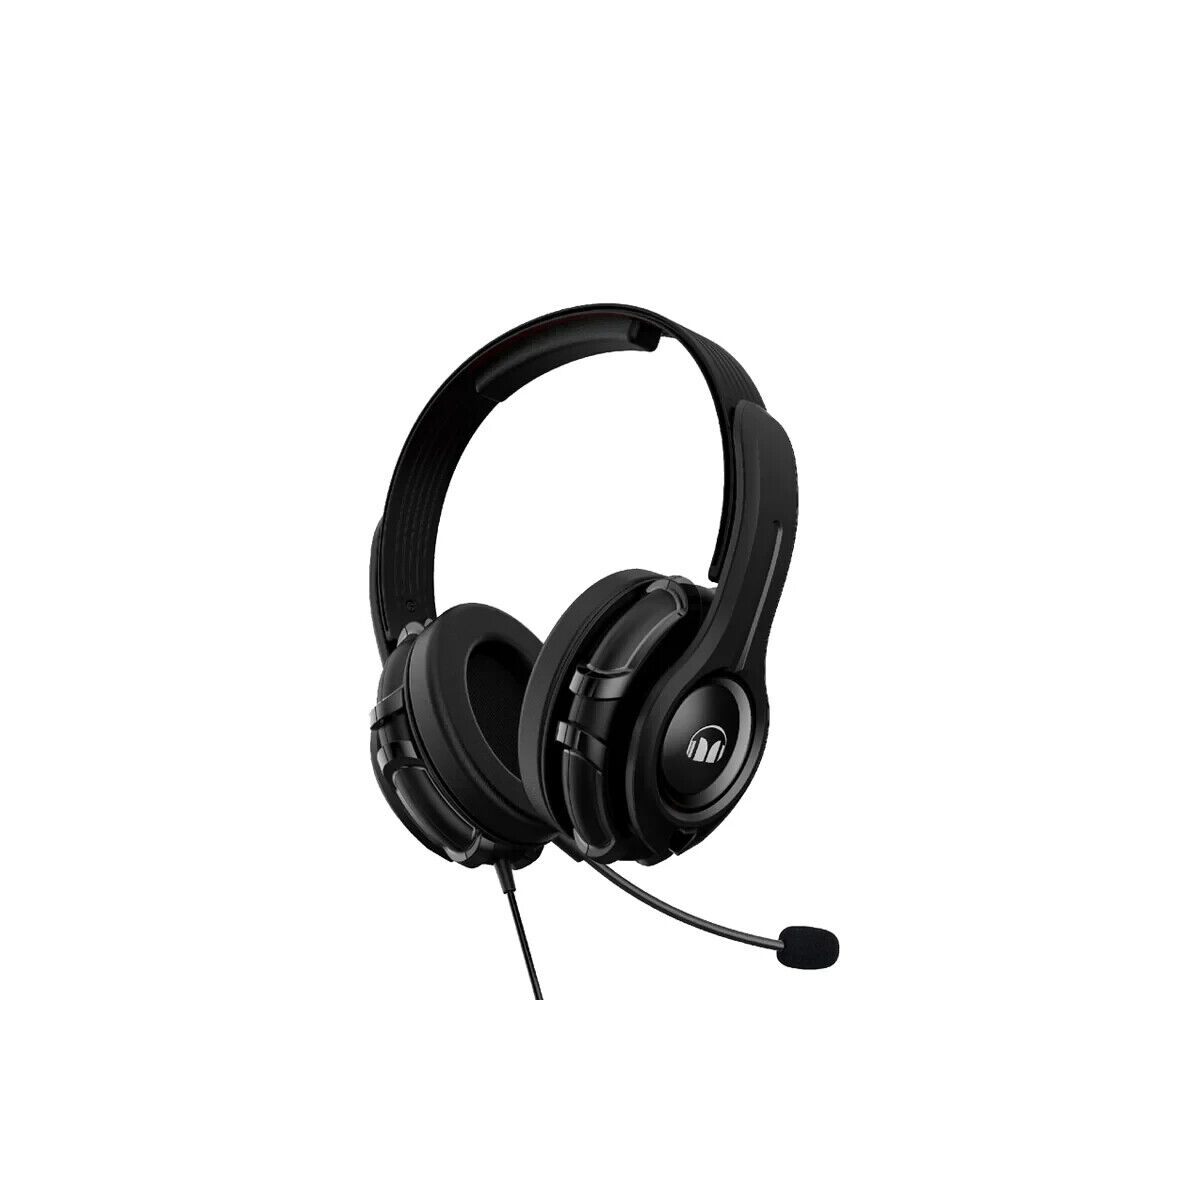 MONSTER KNIGHT X300S Gaming Headset Wired USB 7.1